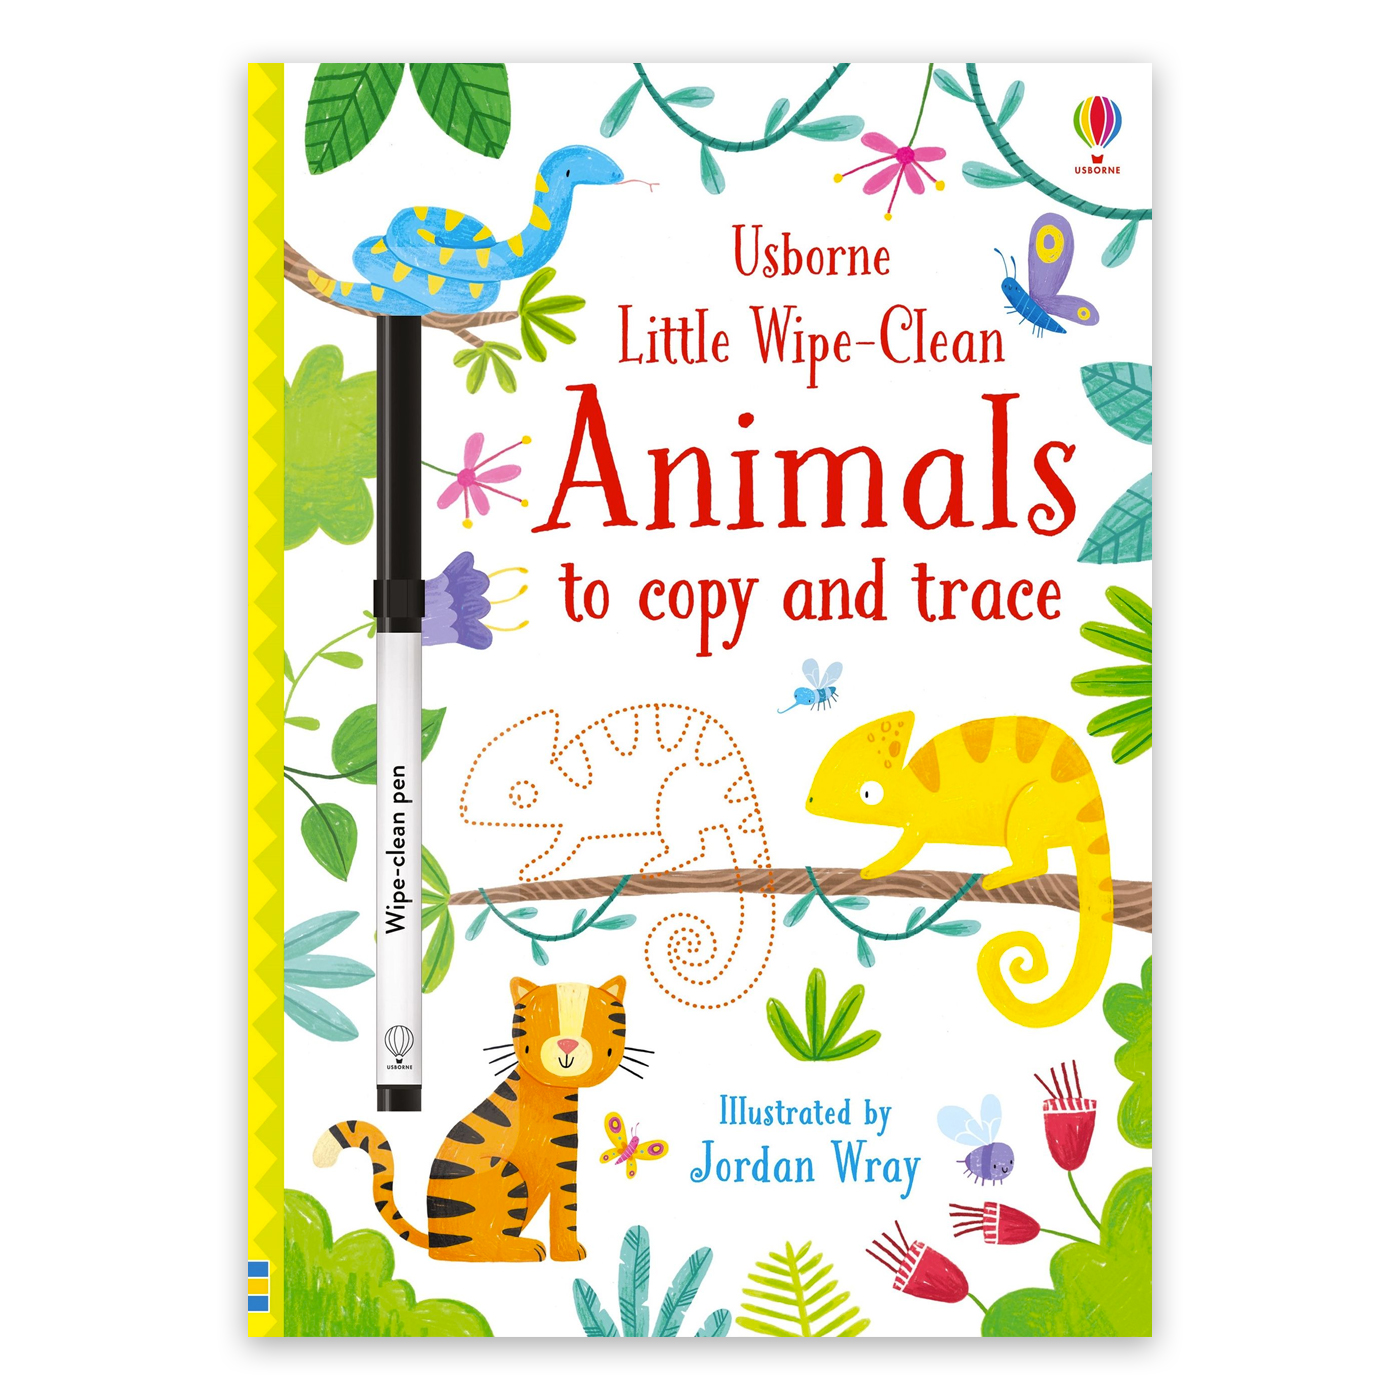 USBORNE Little Wipe-Clean Animals to copy and trace